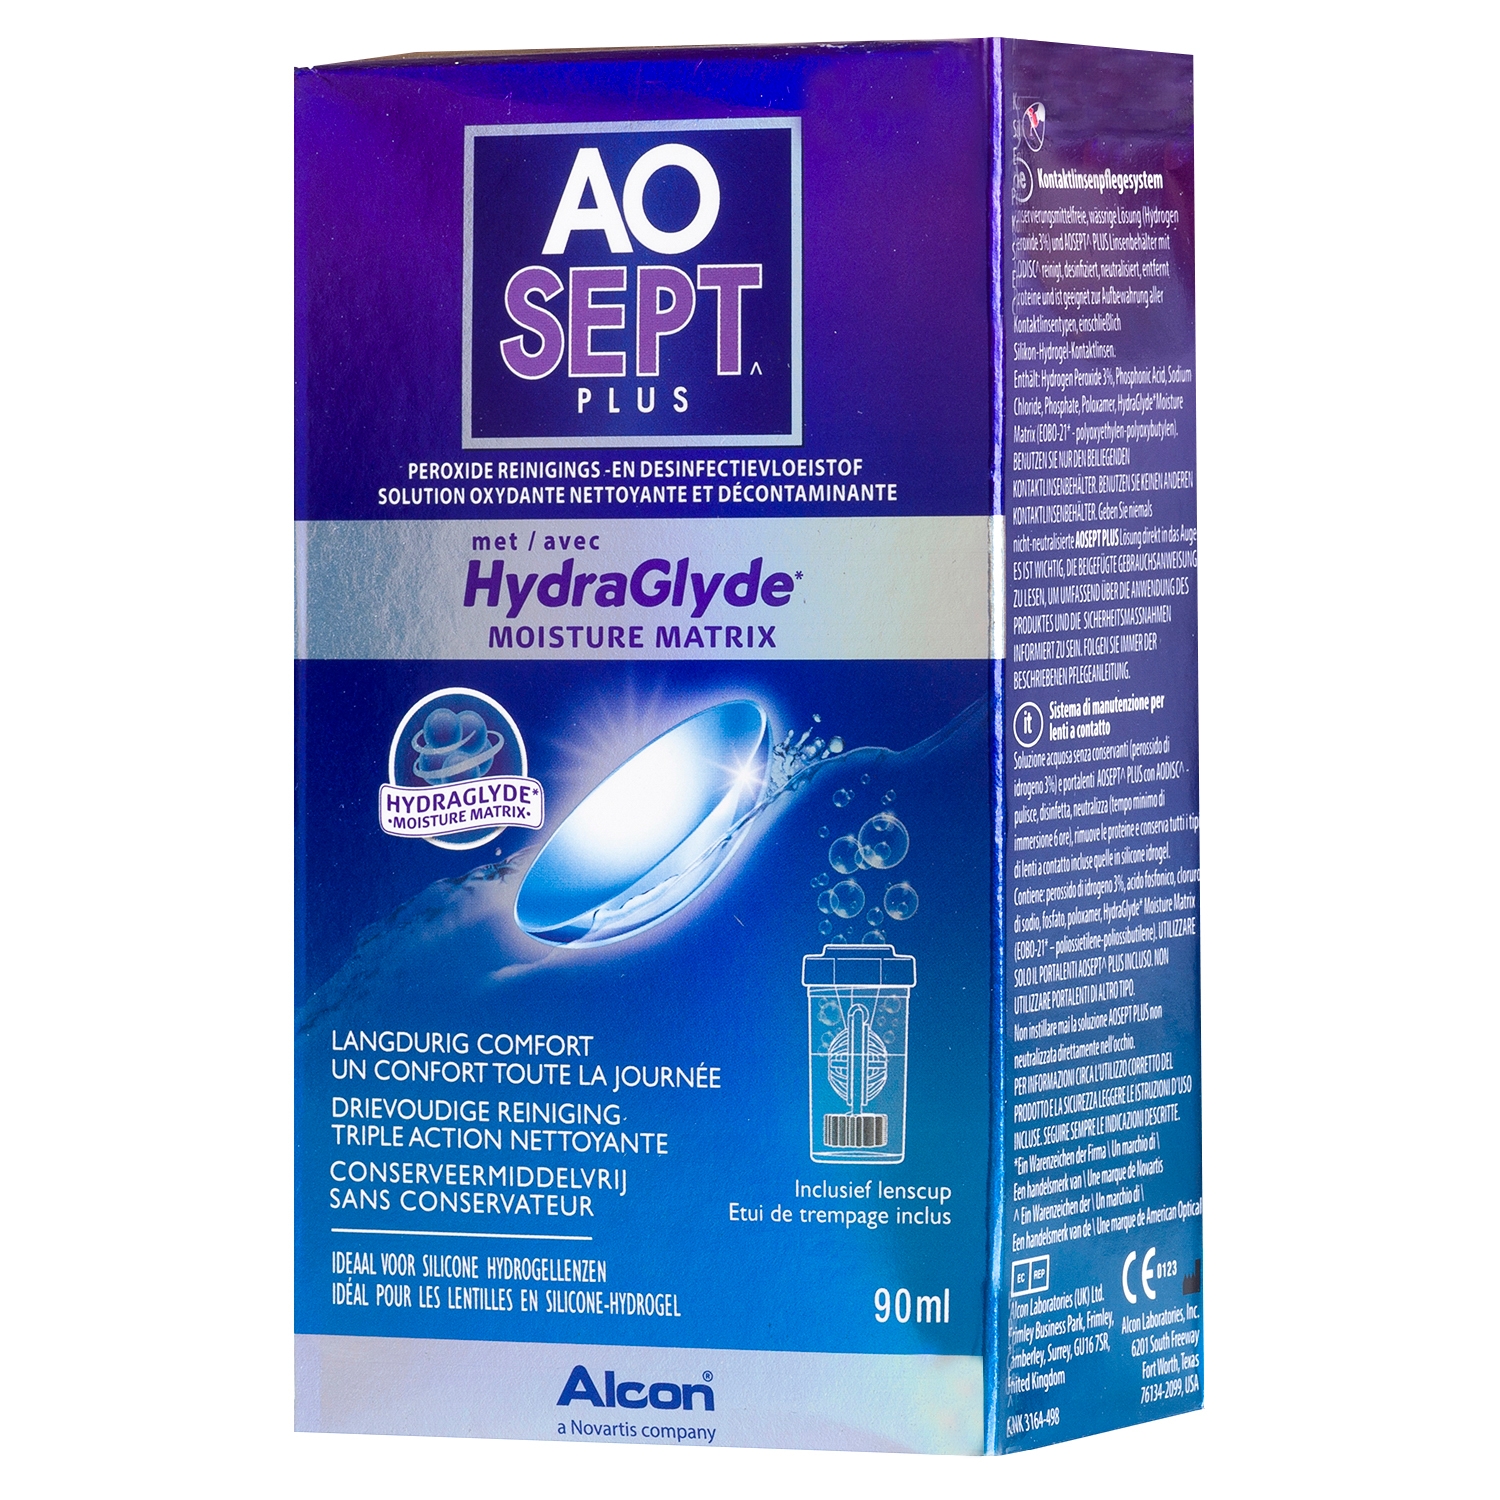 AOSEPT PLUS HydraGlyde Travelpack 90ml